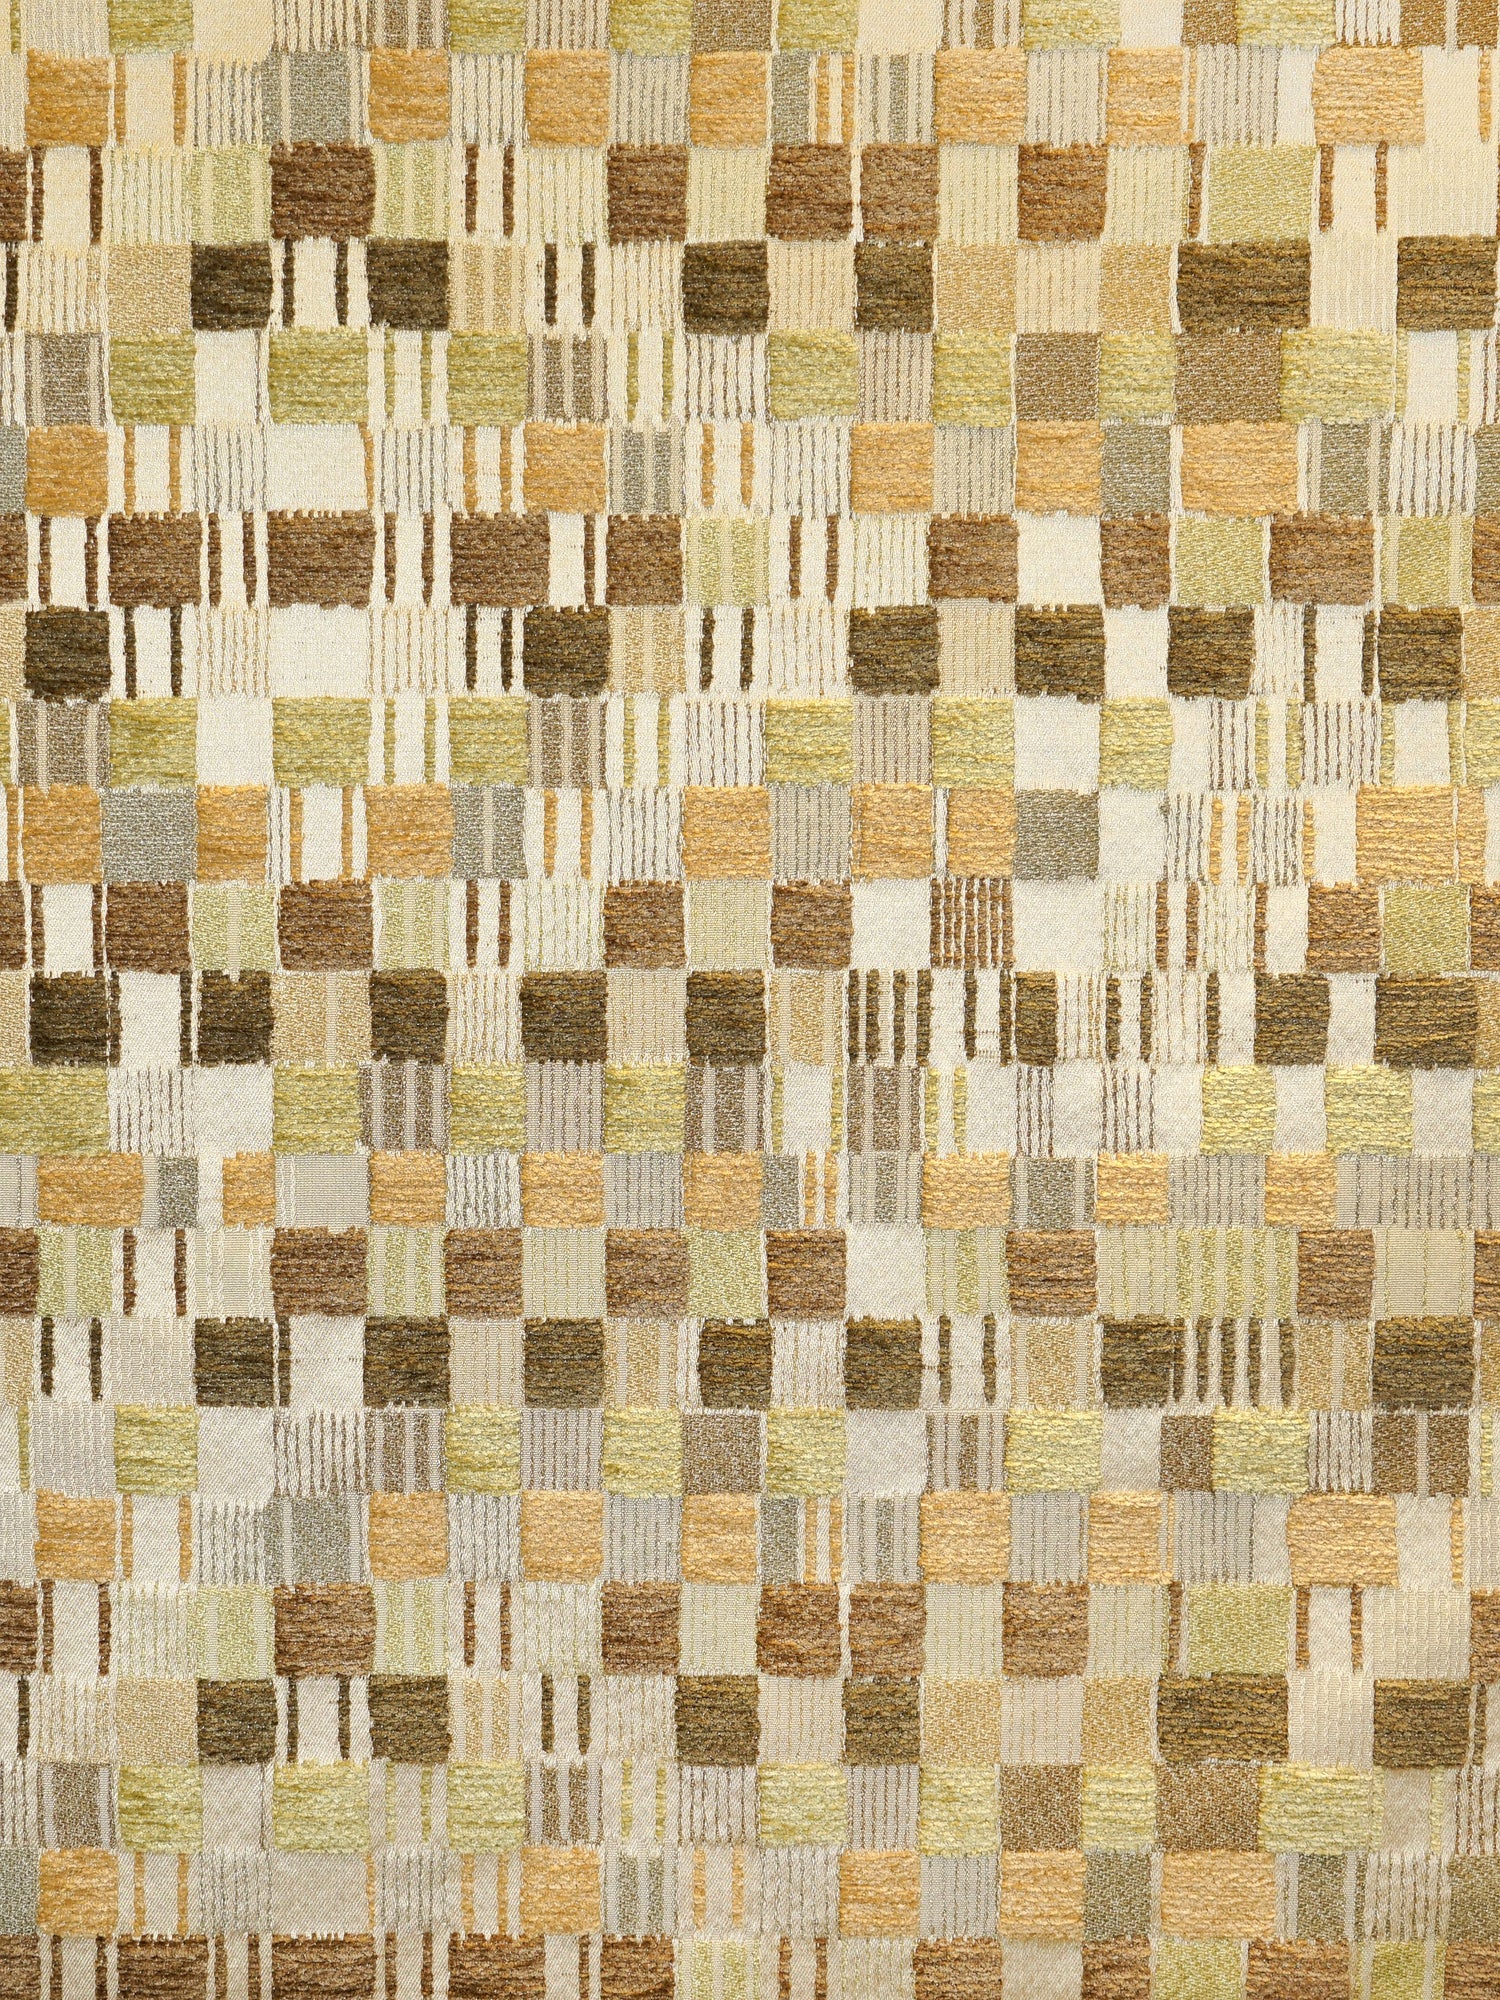 Congo Square fabric in tan multi color - pattern number AL 0003CLK8 - by Scalamandre in the Old World Weavers collection